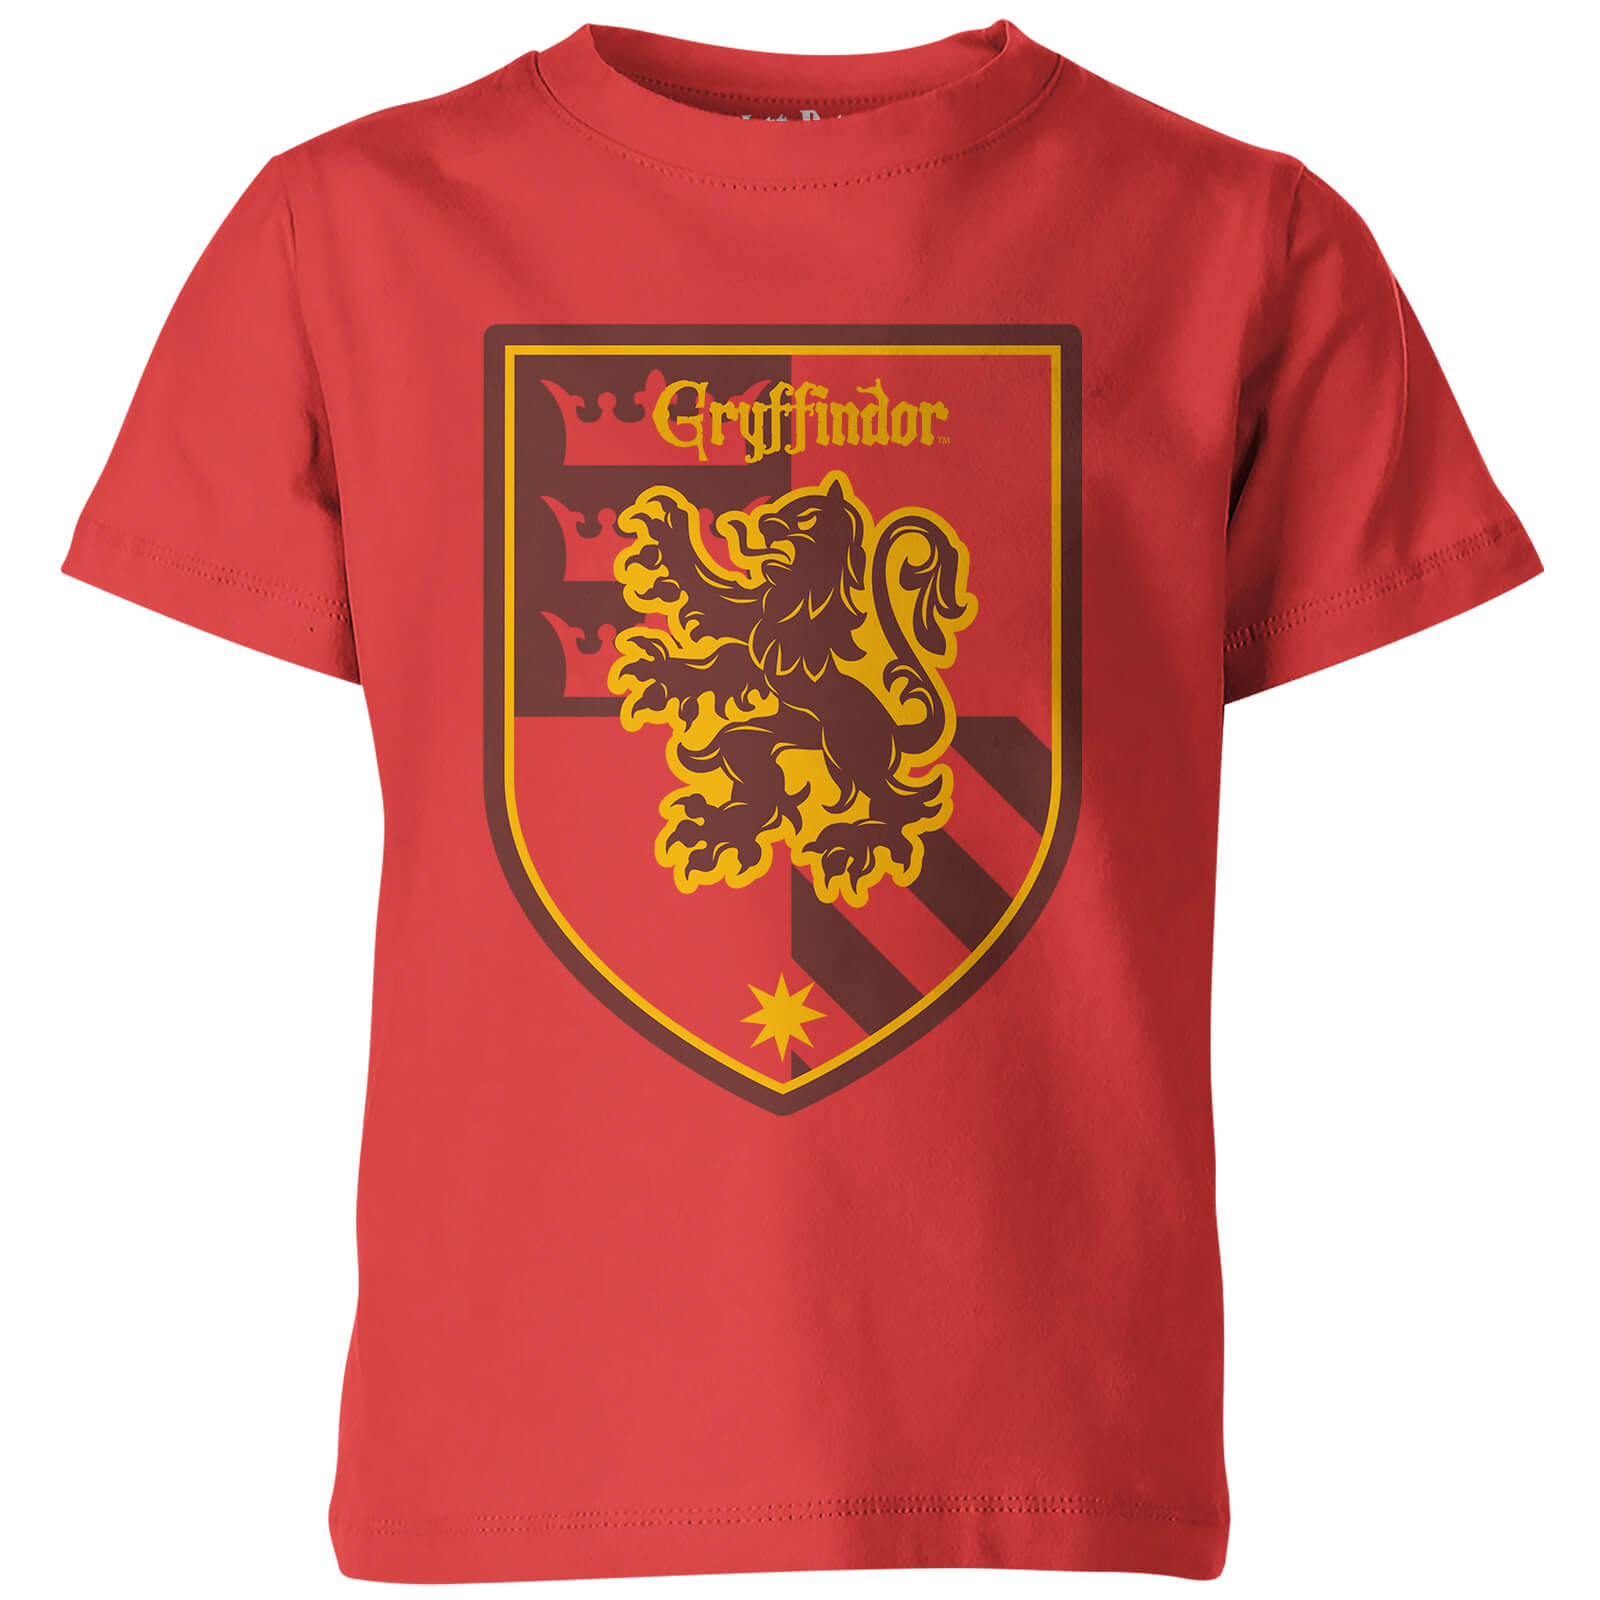 Harry Potter Gryffindor Red Kid's T-Shirt - 11-12 Years - Red